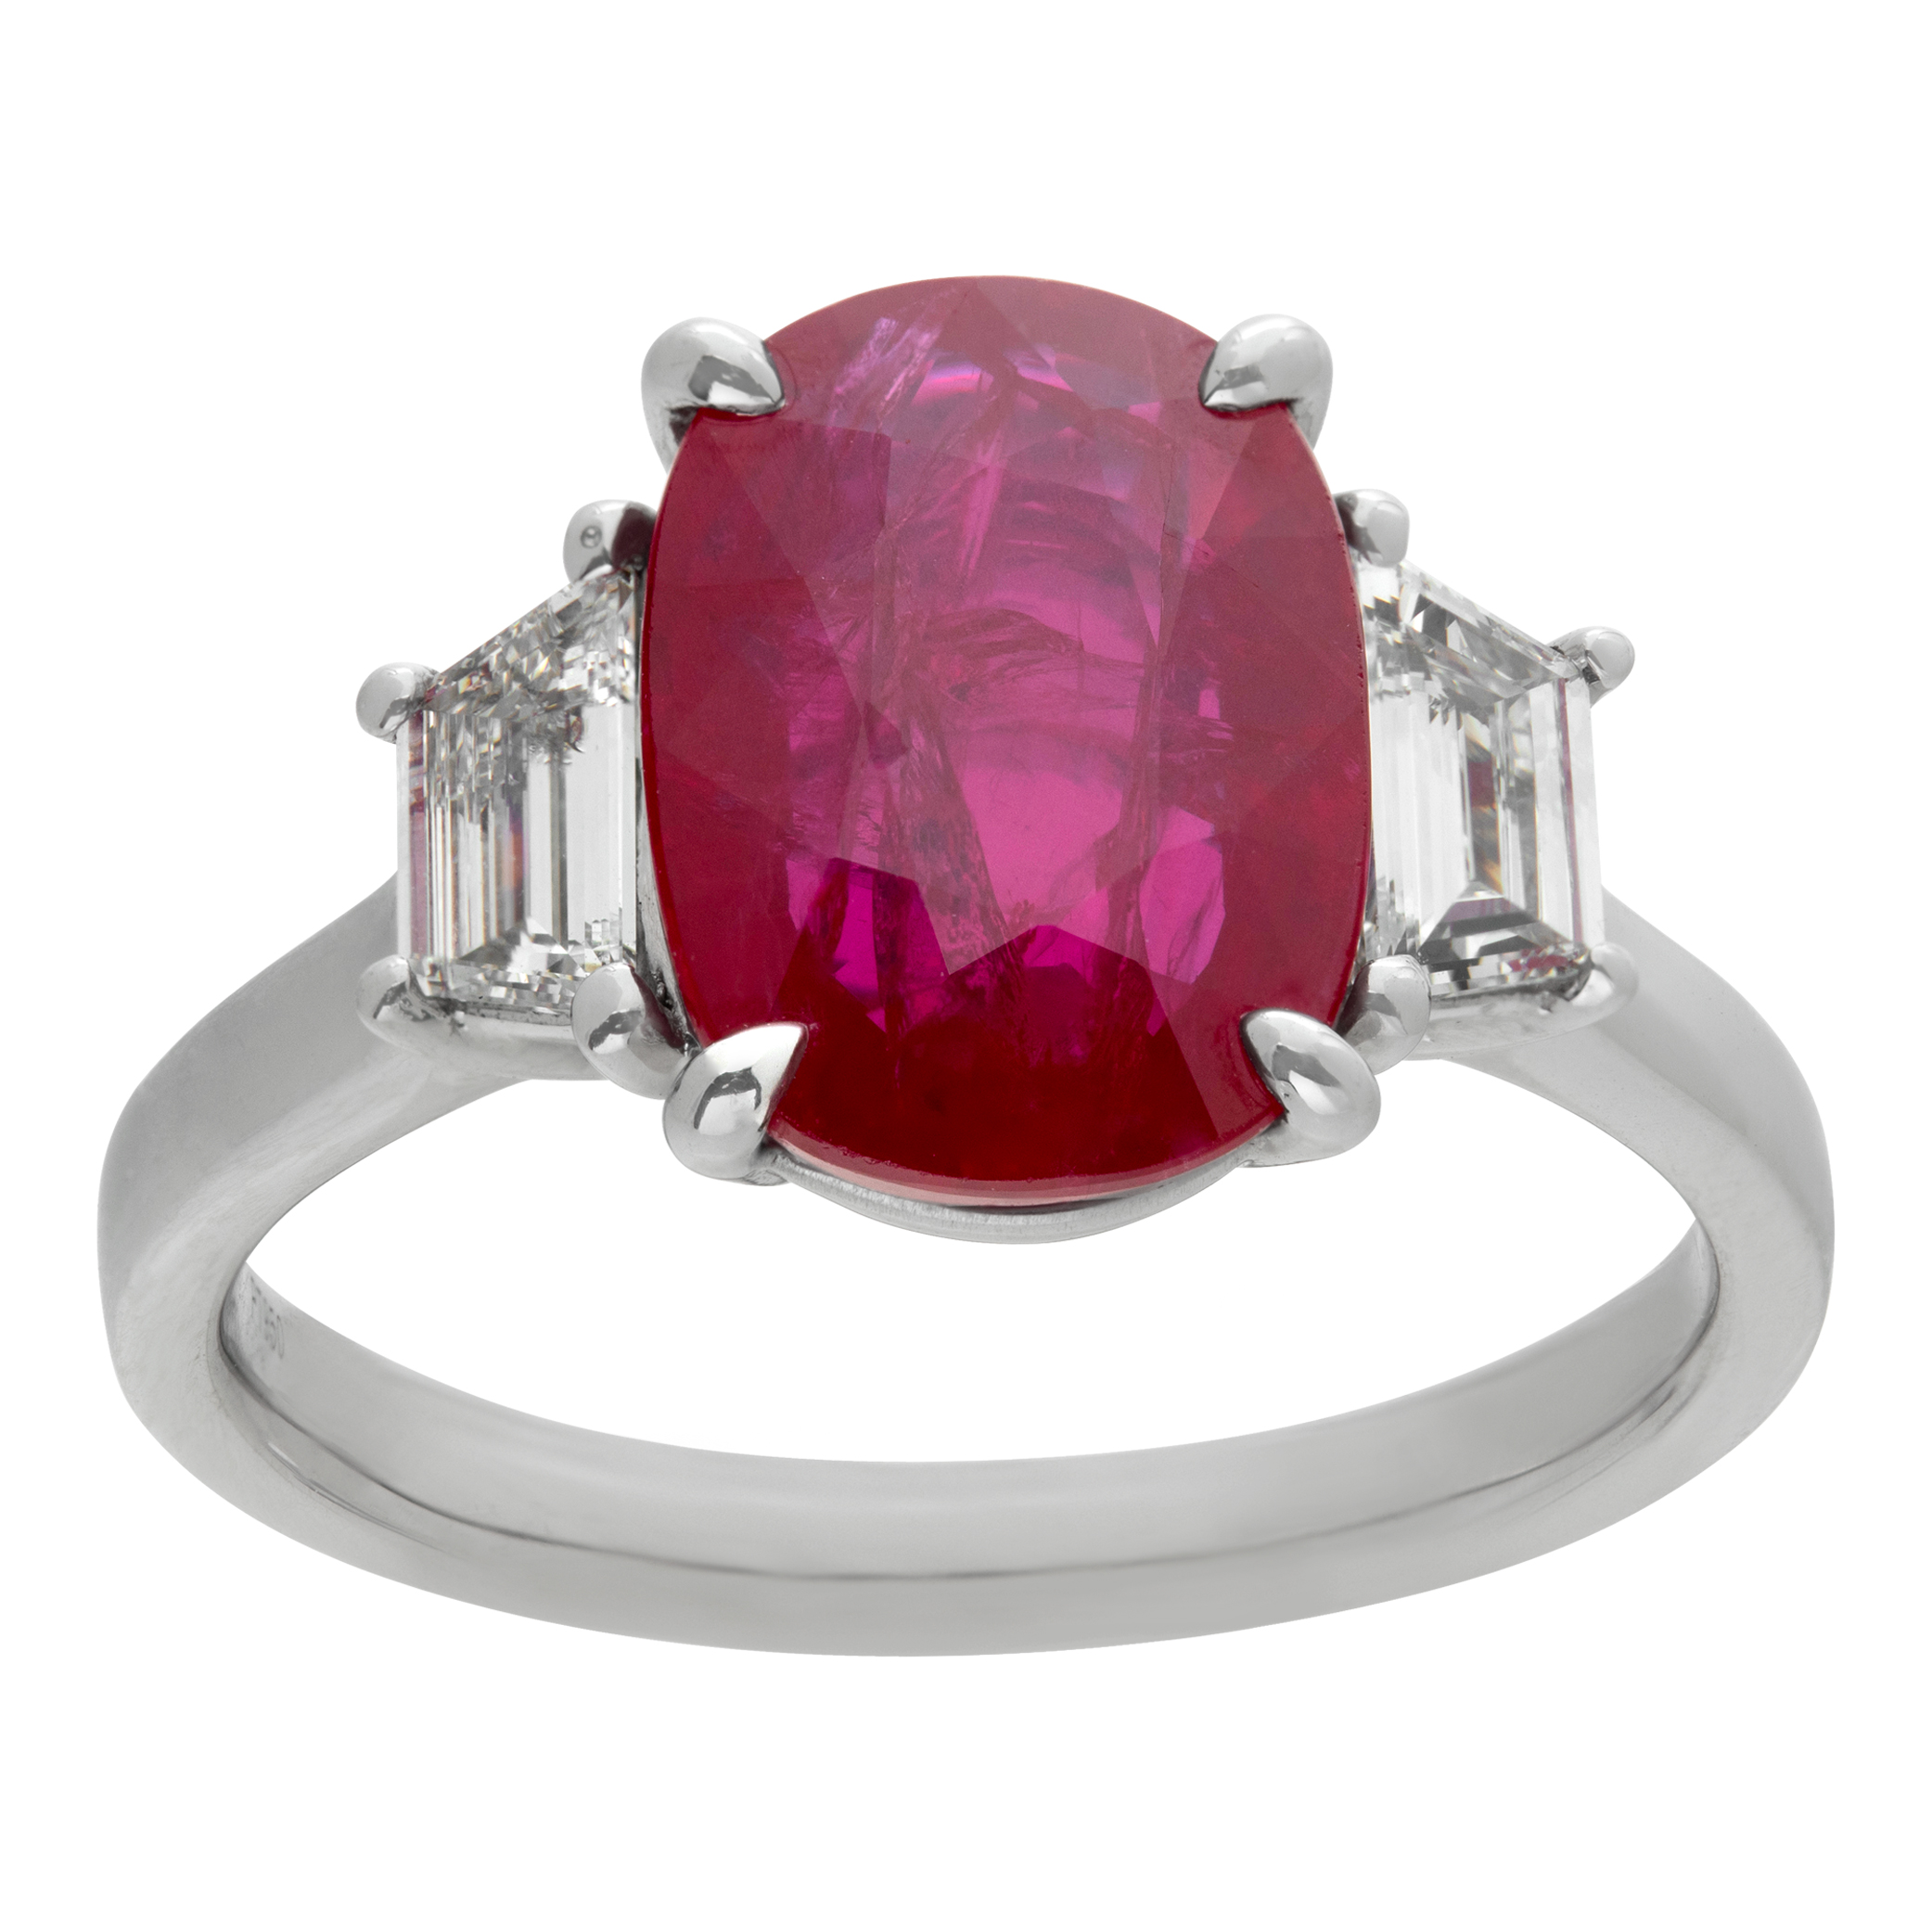 GIA Certified ruby & diamonds ring set in platinum. Brilliant oval cut ruby: 5.03 carats